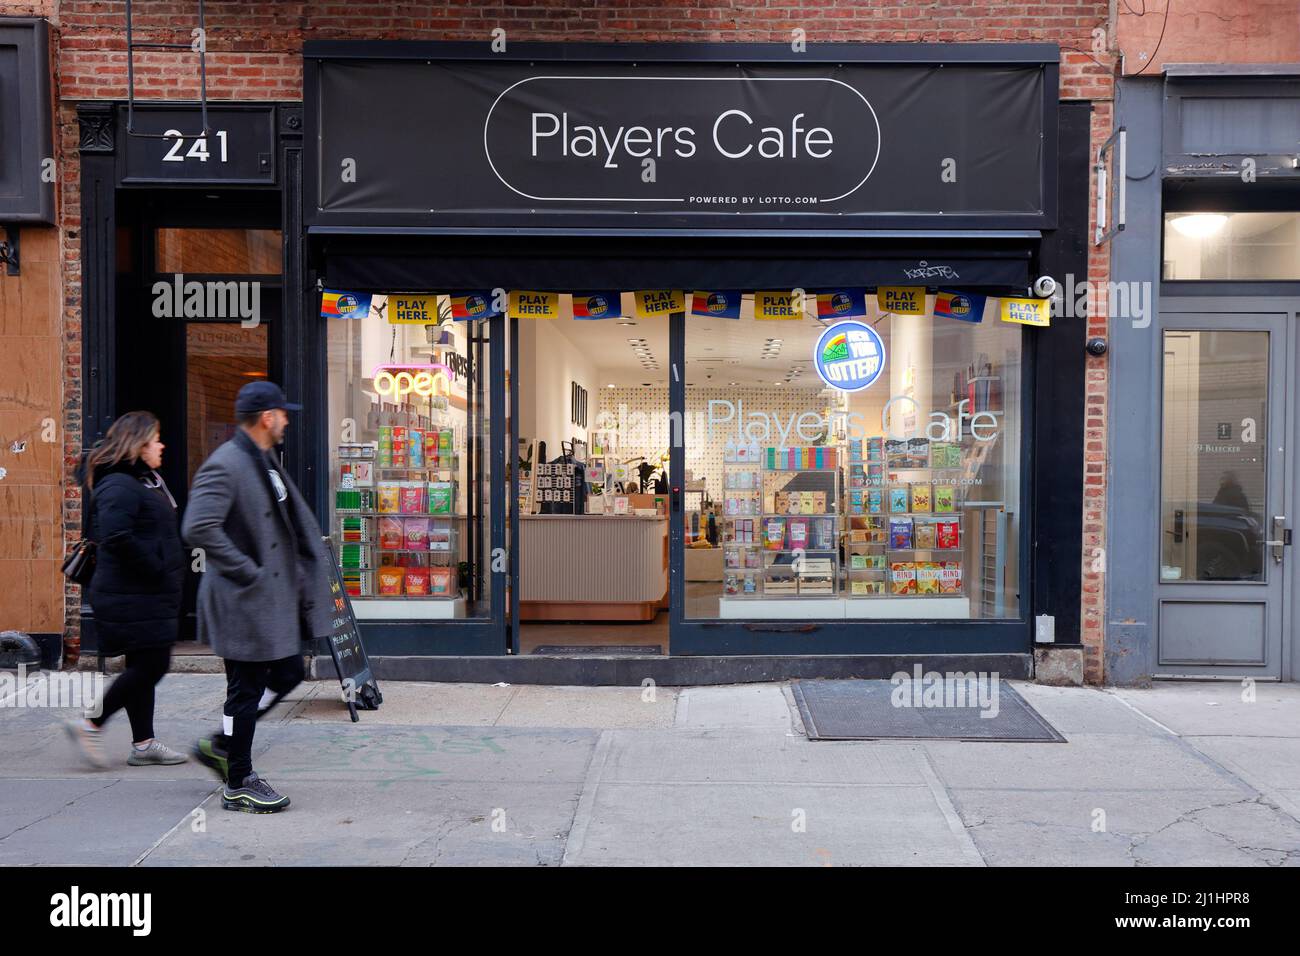 Players Cafe, 241 Bleecker St, New York, NY. exterior storefront of a curated convenience store concept by lotto.com in the Greenwich Village Stock Photo